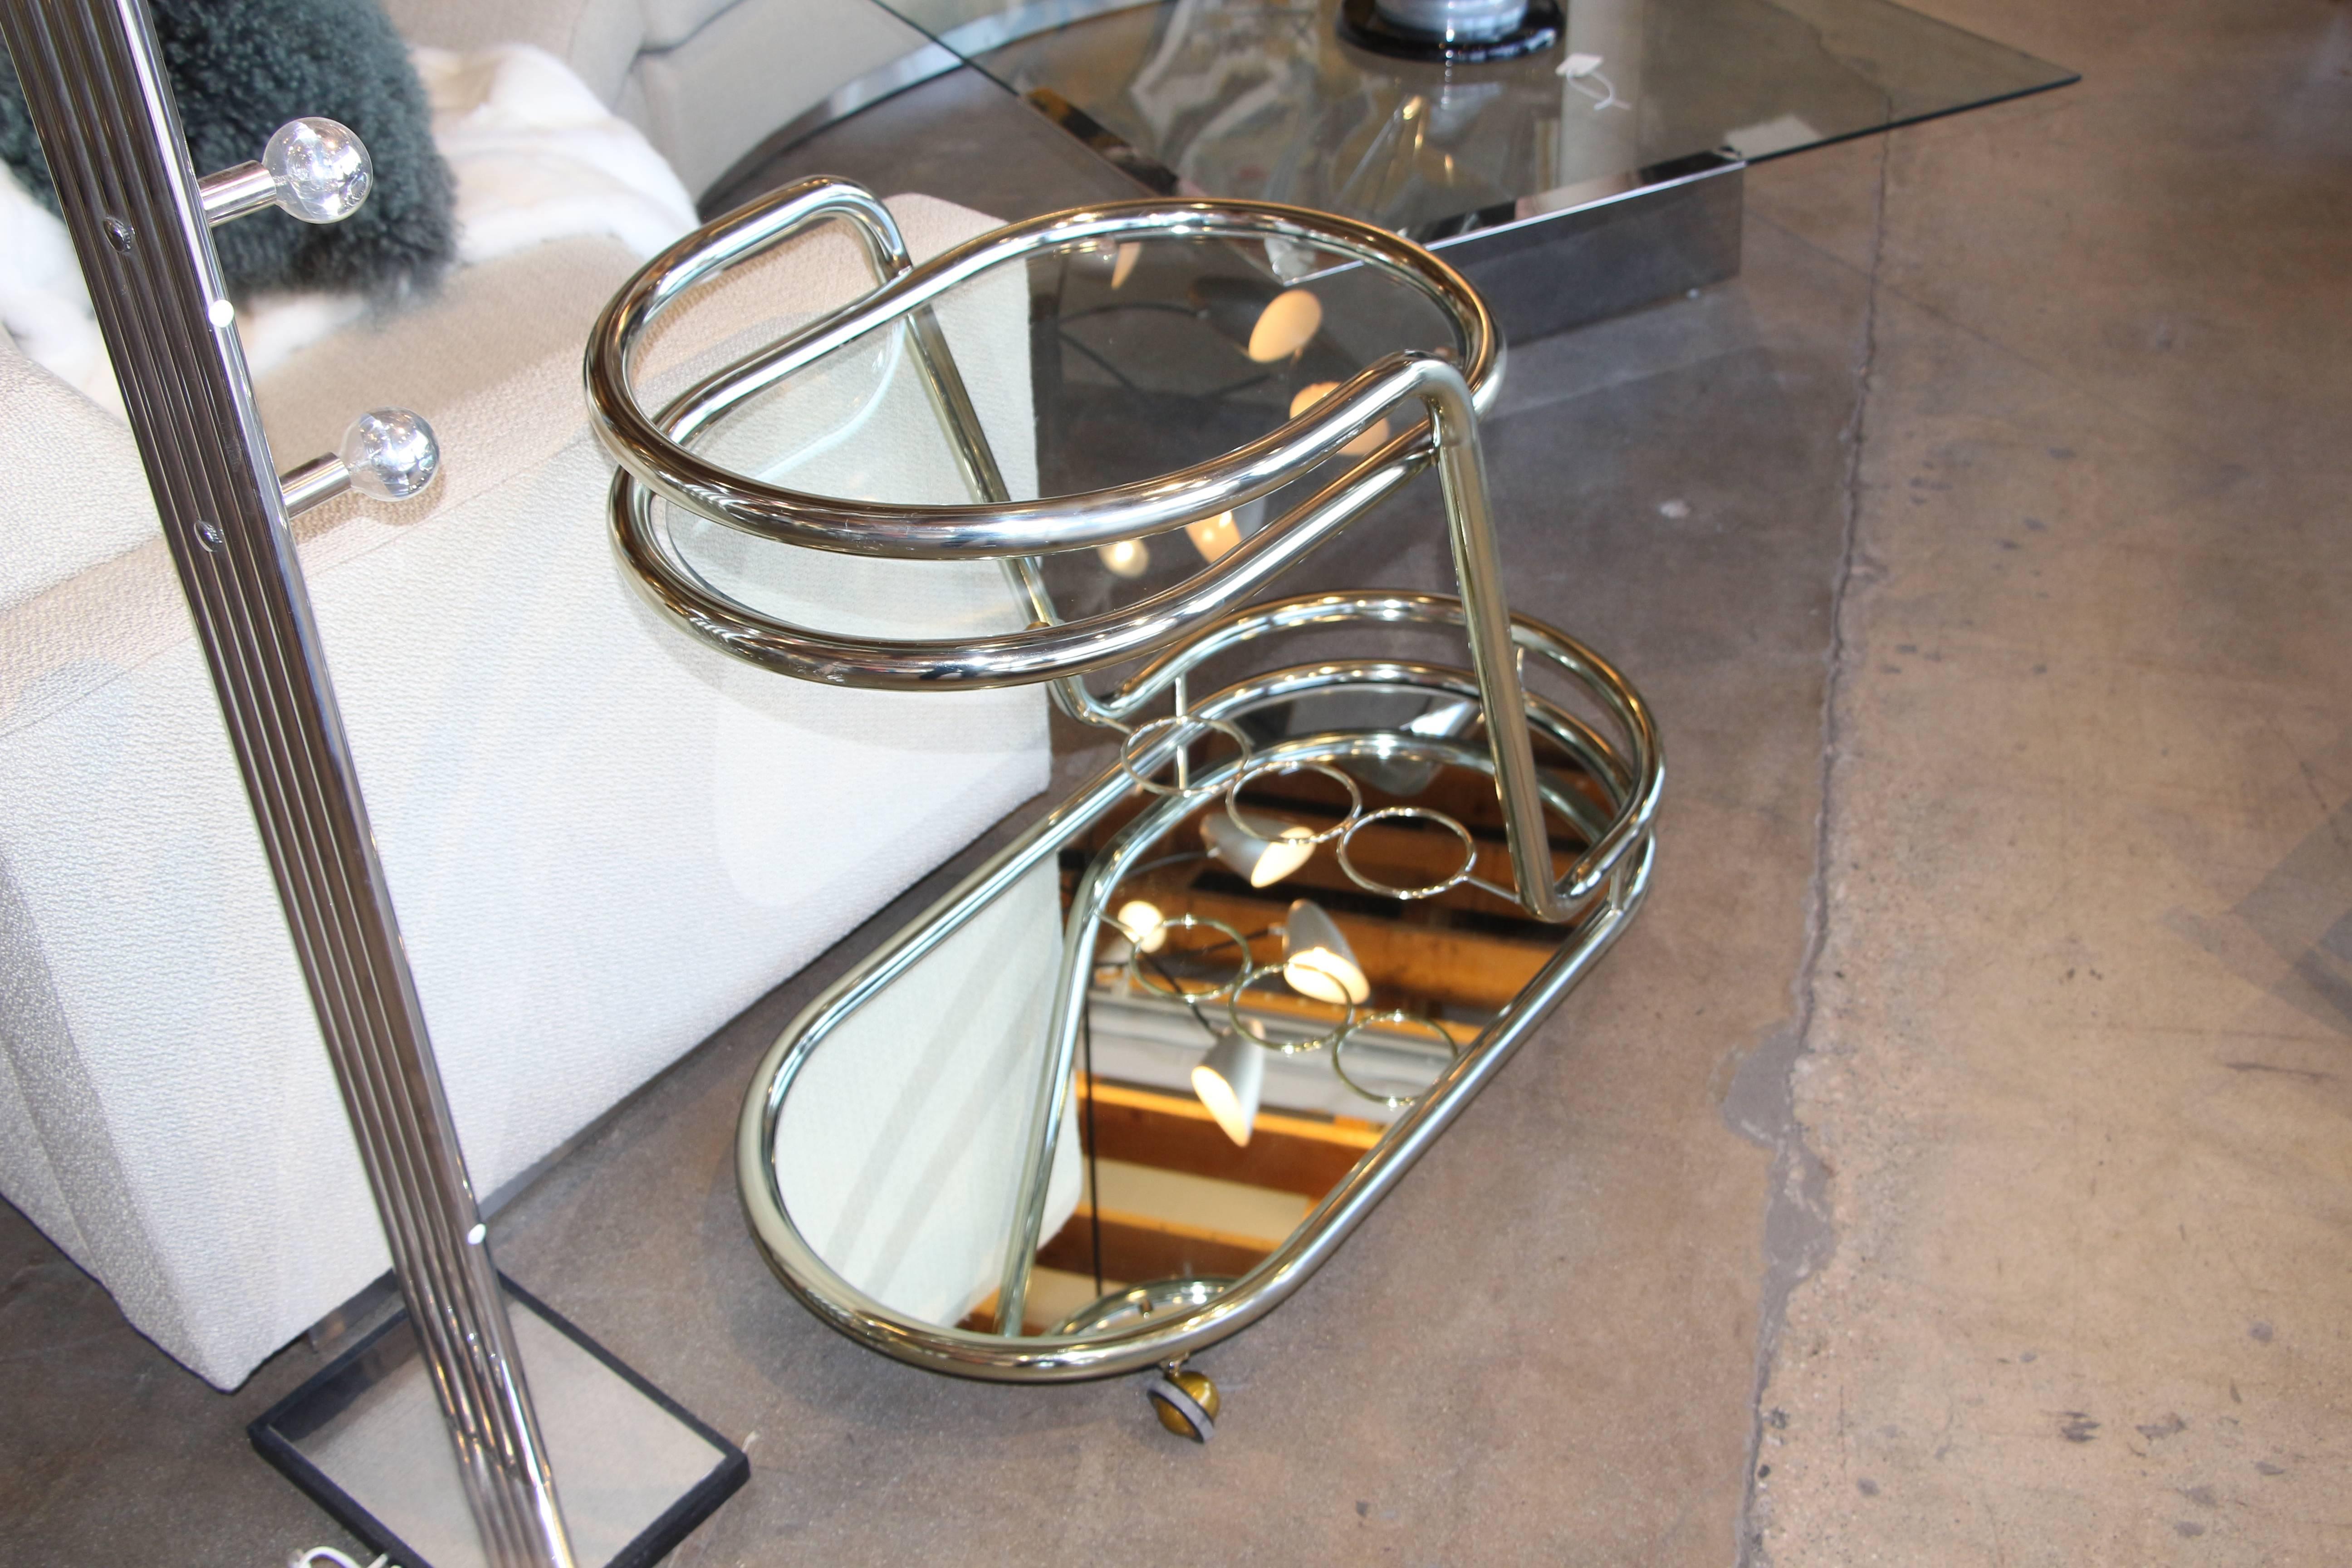 A pretty Champagne colored lacquered chrome cart from the 1980s out of a famous palm springs hotel designed by Albert Frey and redone in the 1980s by Donald Lloyd Smith. This bar cart is from the 1980s remodel. We had to replace the casters which